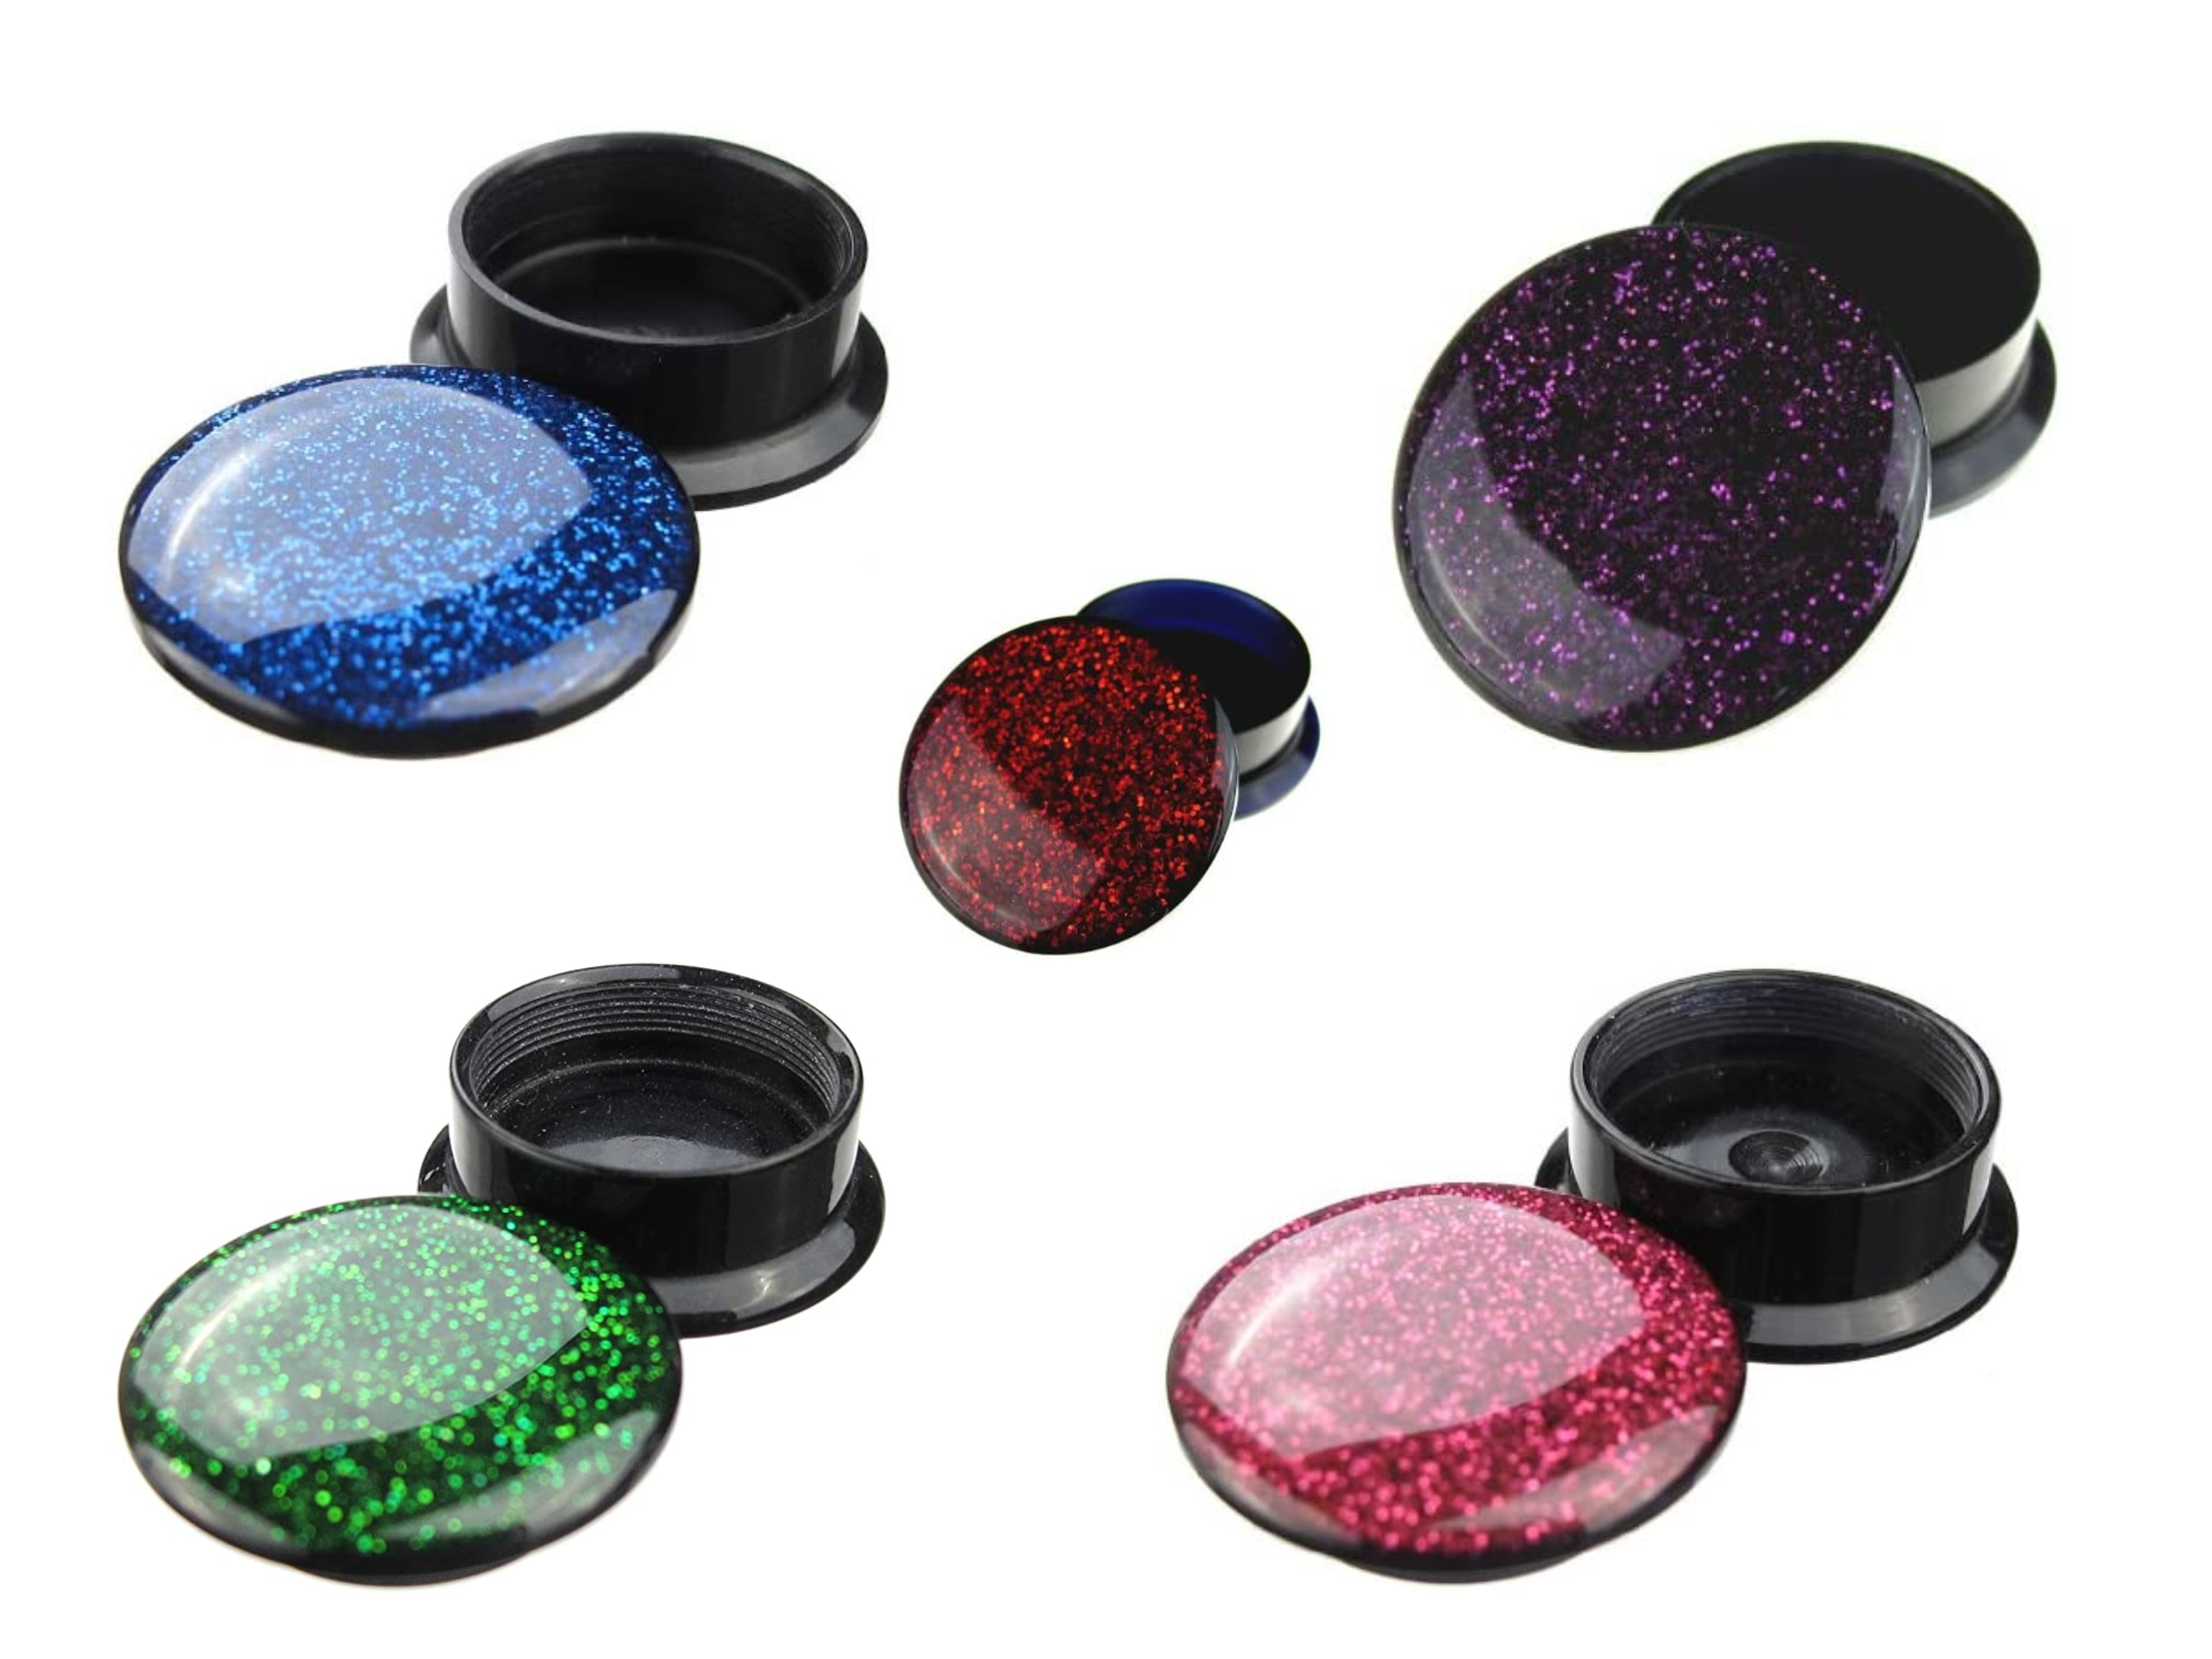 Wholesale Joblot Of 200 Glitter Ear Flesh Tunnel Plug Hole Stretcher Screws In Mixed Colours & Sizes 4-26mm